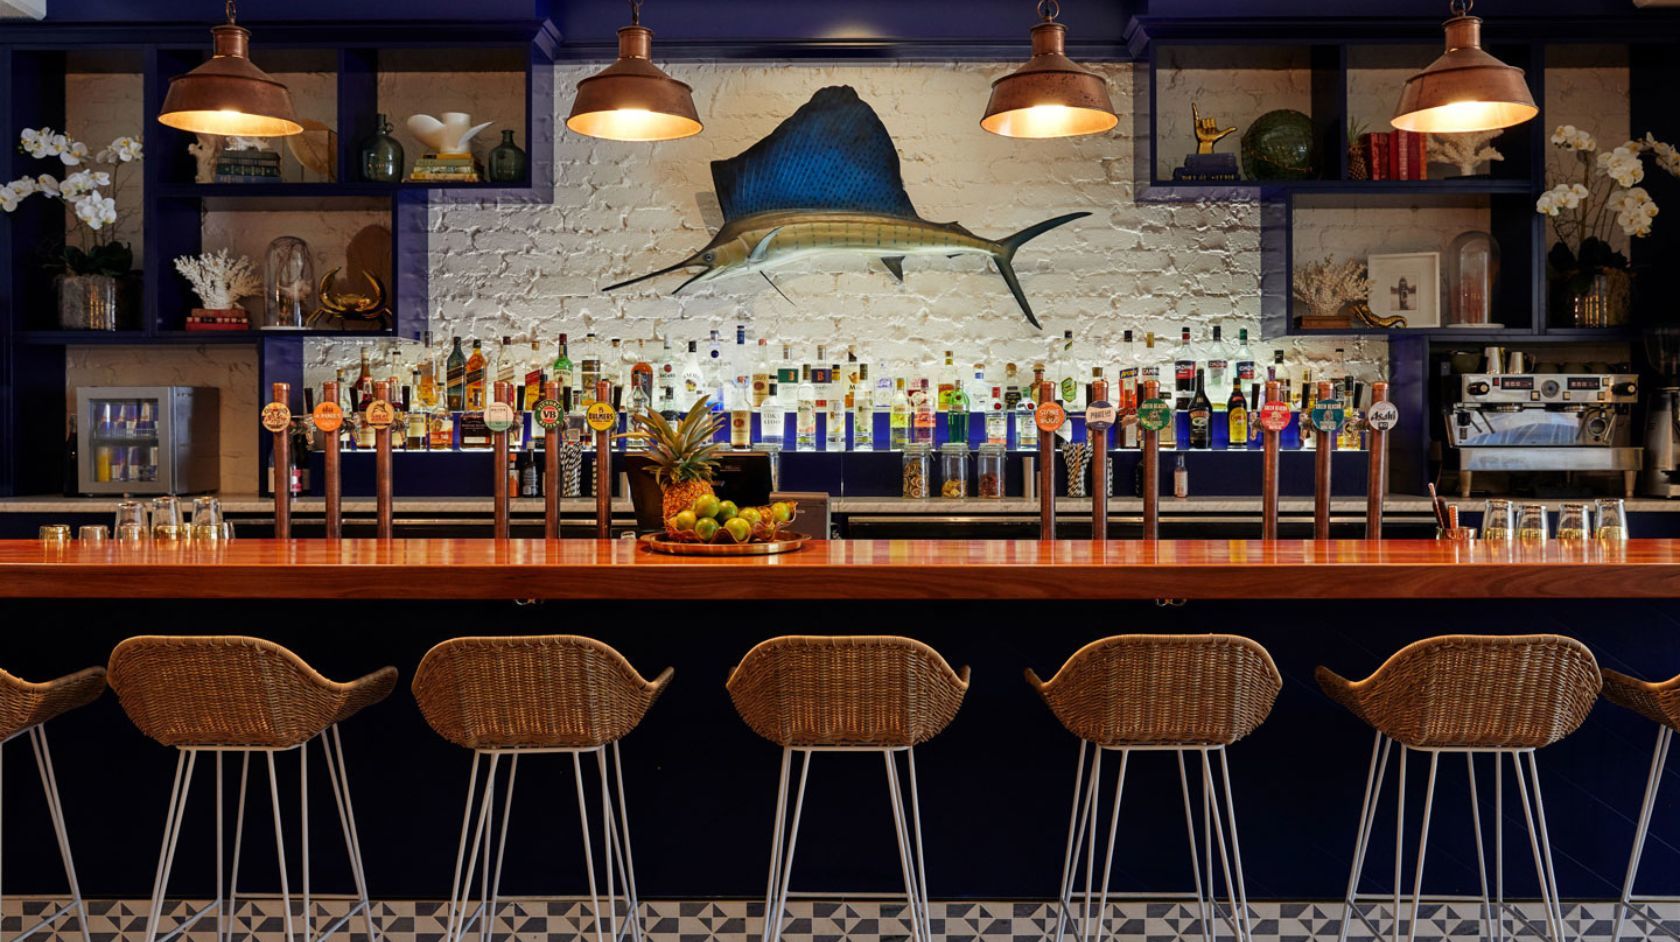 A Bar With Stools And A Bar With A Large Mural On The Wall